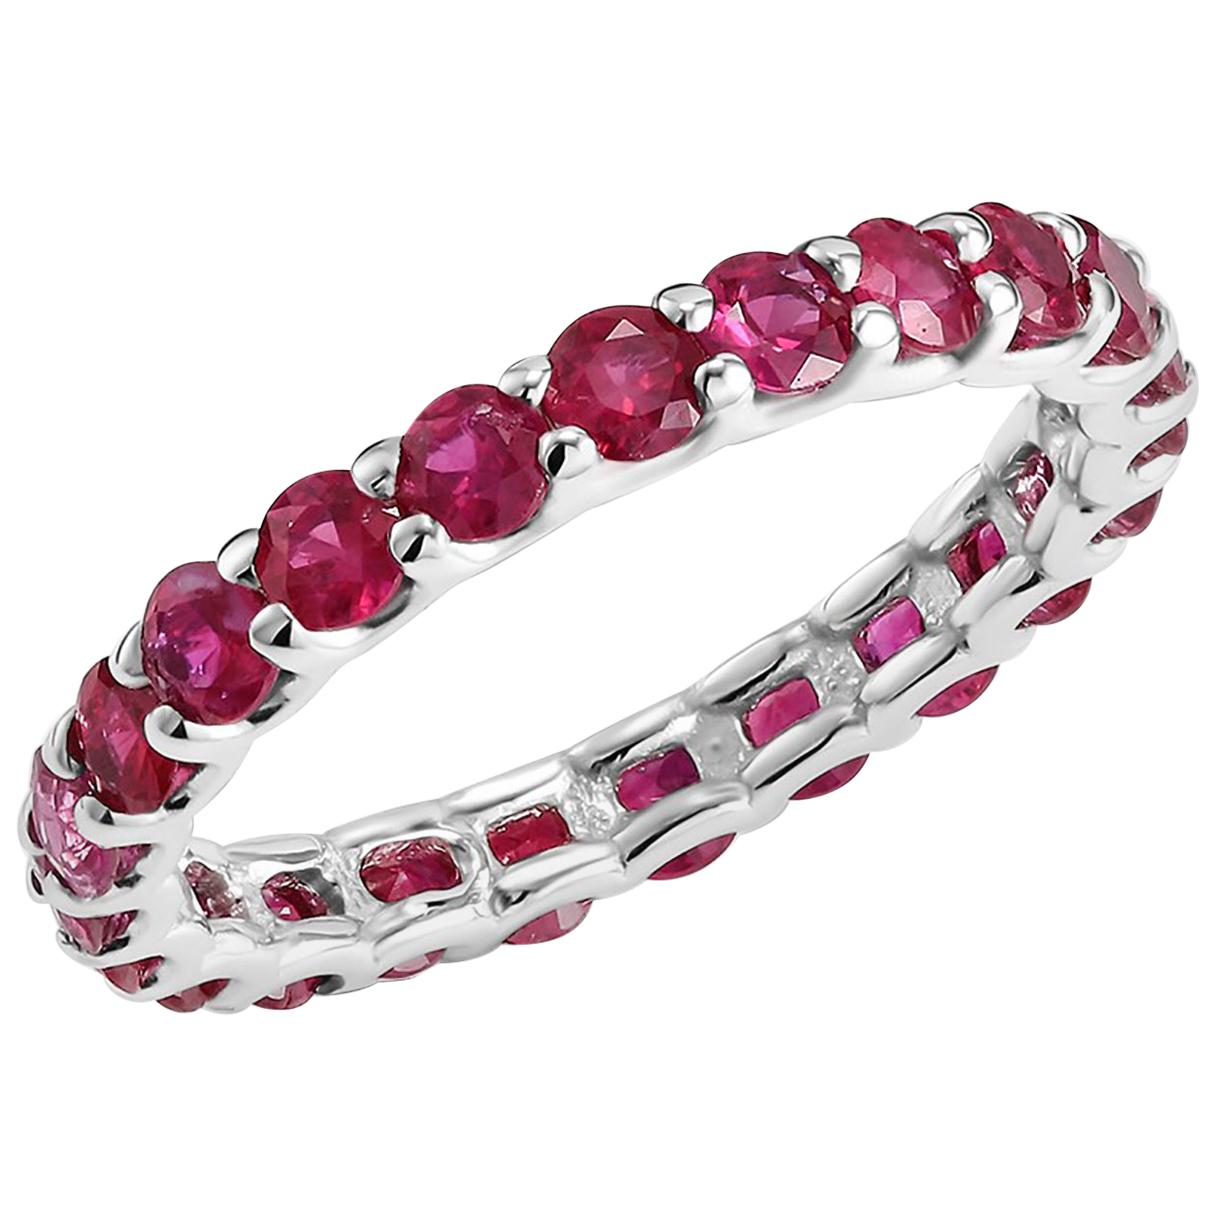 Fourteen karats white gold eternity wedding or stacking band 
Basket Prong Set Setting
Diamond-Cut Burma ruby weighing 2.30 carat 
Stone Size 2.75 millimeter
New ring. 
Ring size 6.25 In Stock
The ring cannot be resized 
Handmade in the USA
Our team